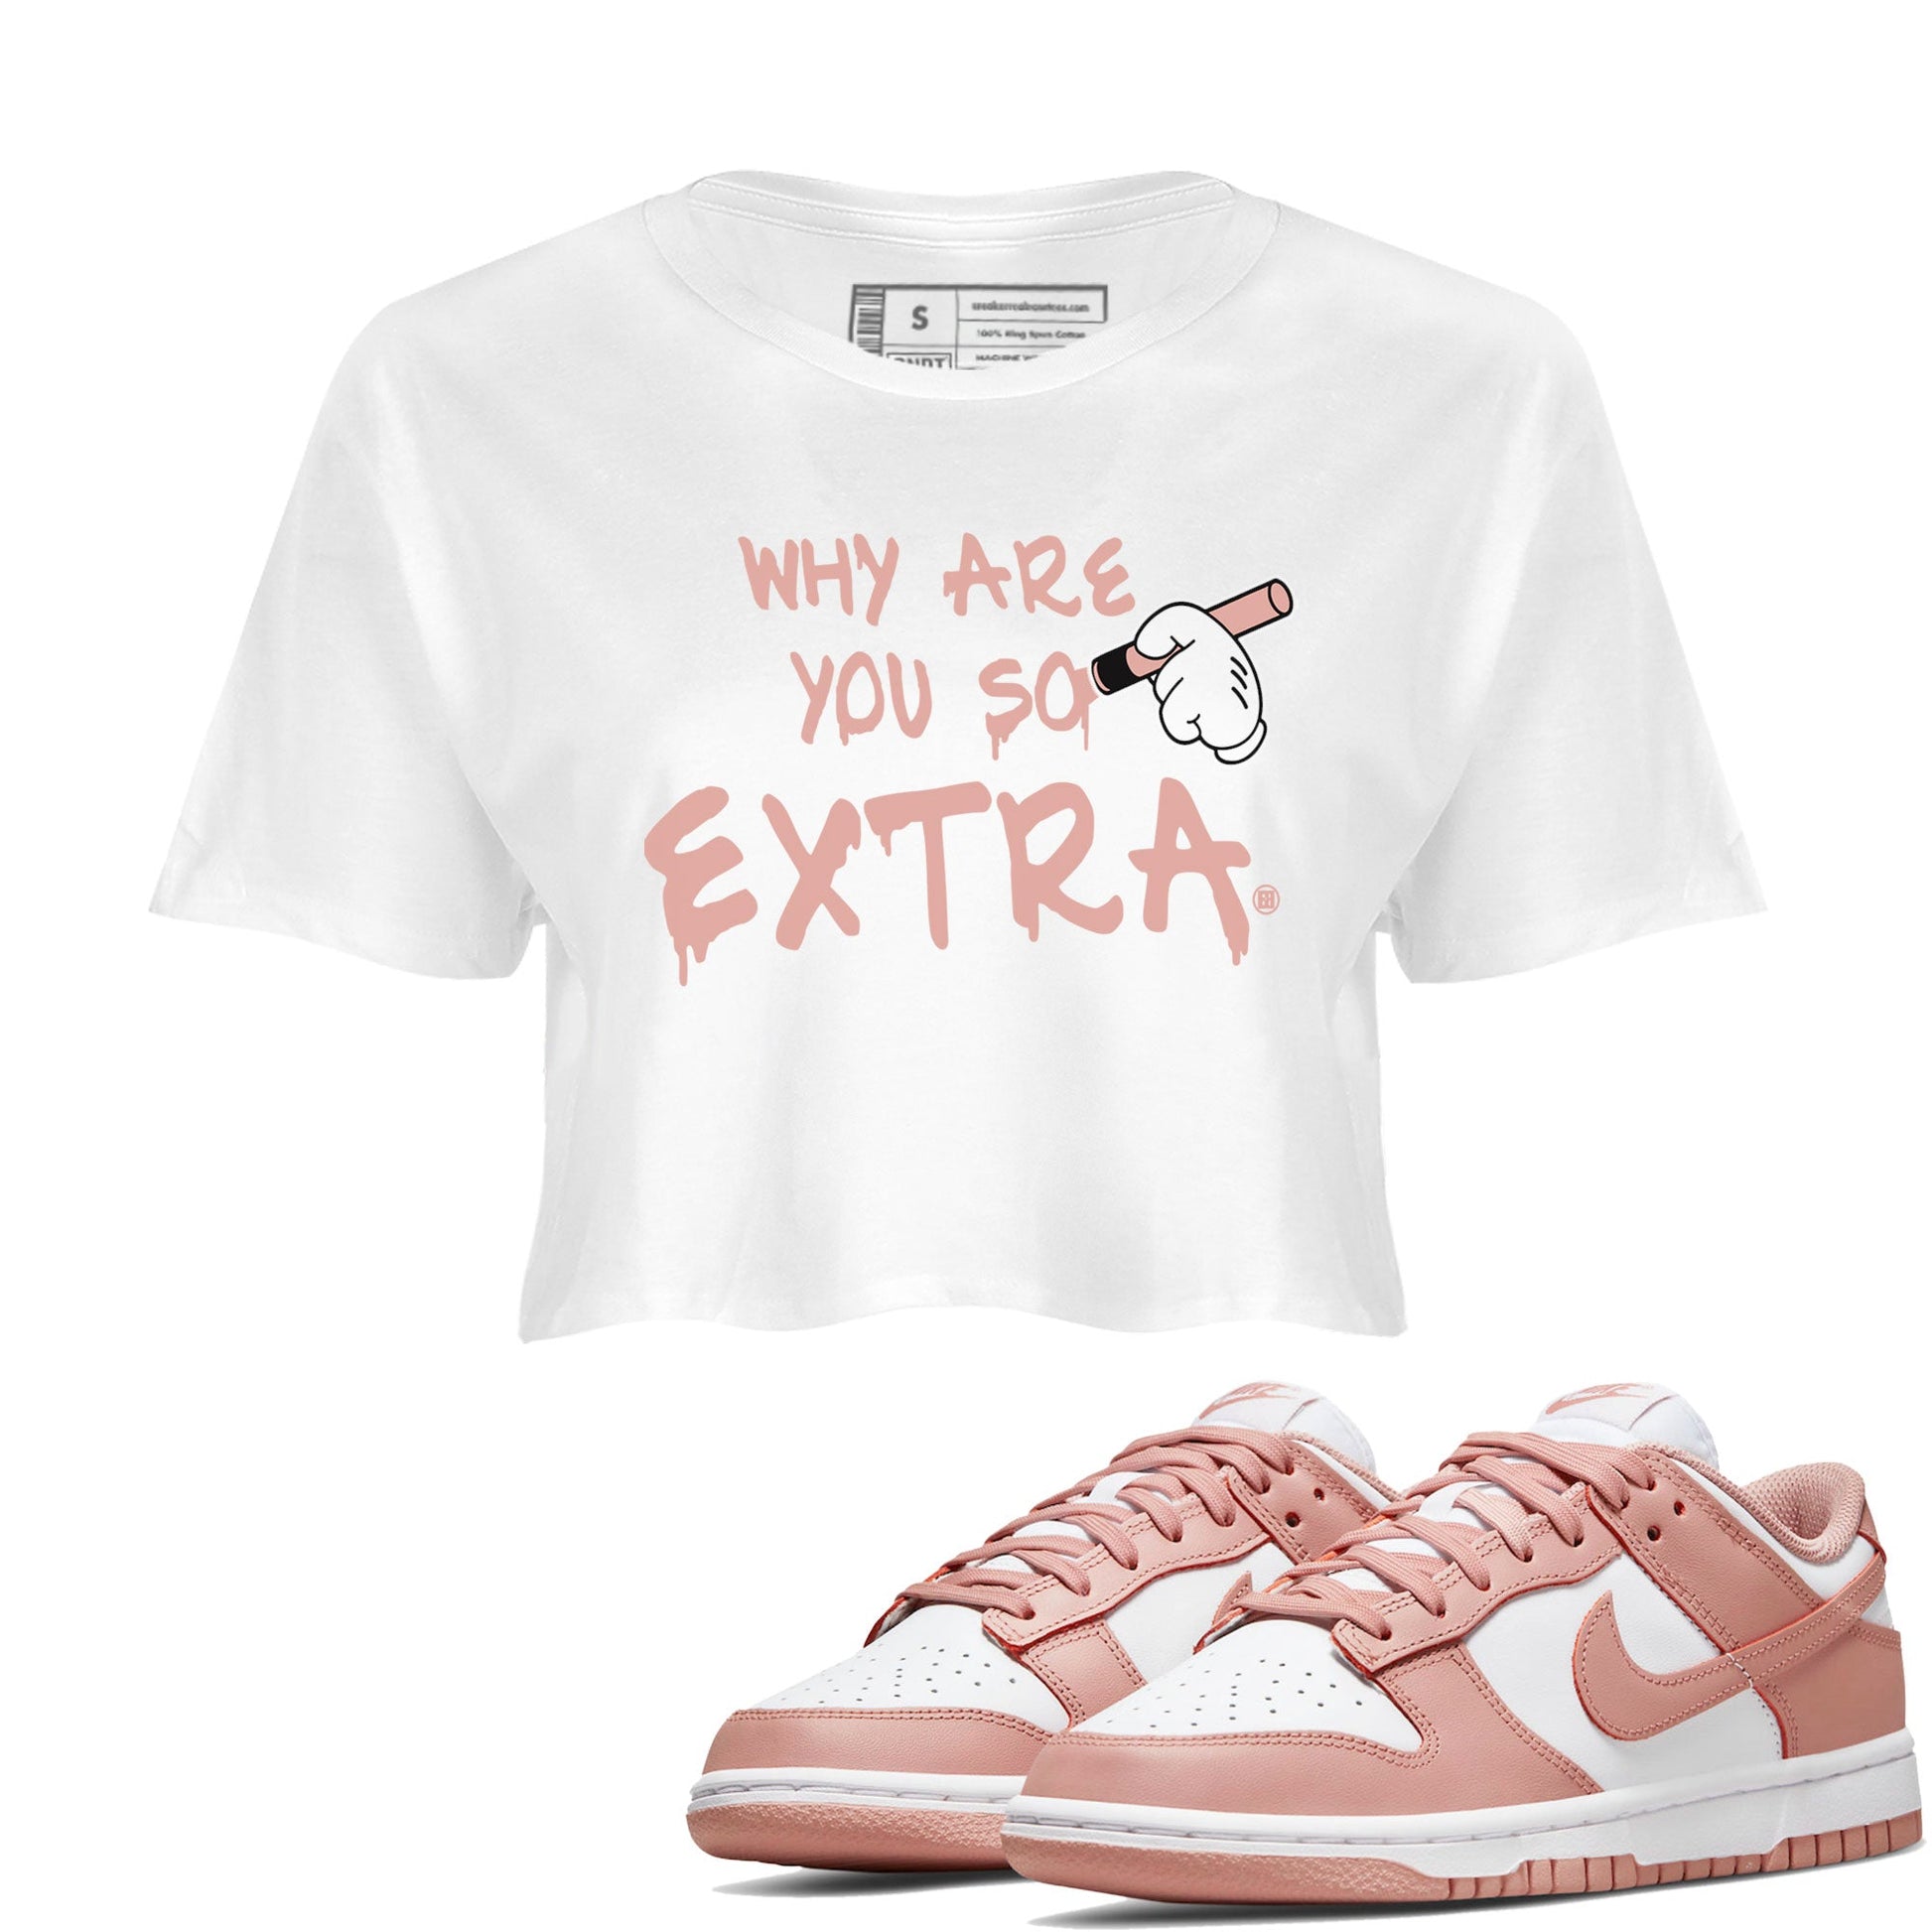 Dunks Low Rose Whisper shirt to match jordans Why Are You So Extra sneaker tees Dunk Rose Whisper SNRT Sneaker Release Tees White 1 Crop T-Shirt